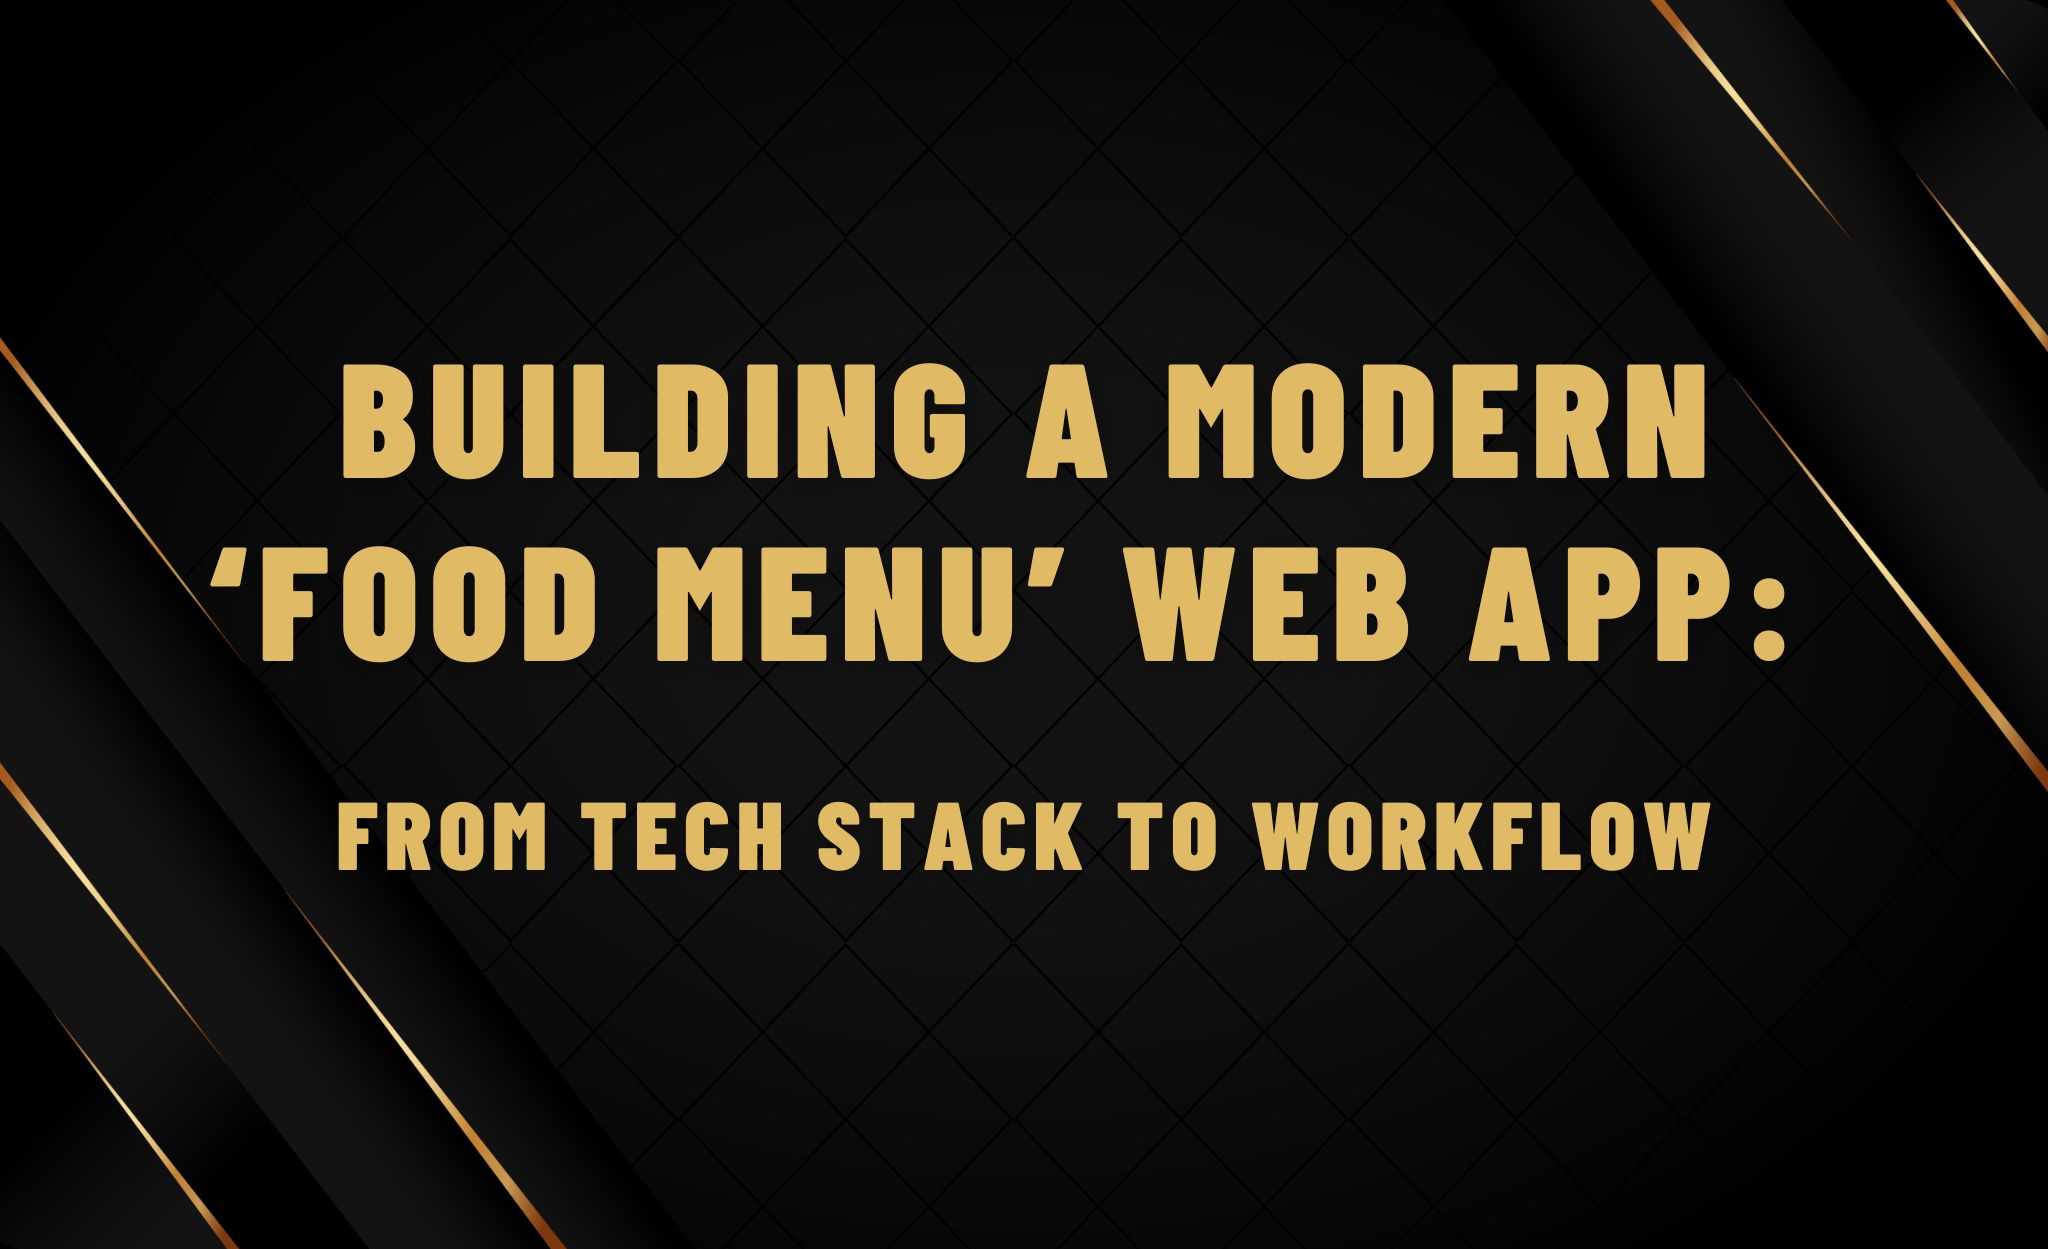 How I Built a Modern 'Food Menu' Web App: From Tech Stack to Workflow